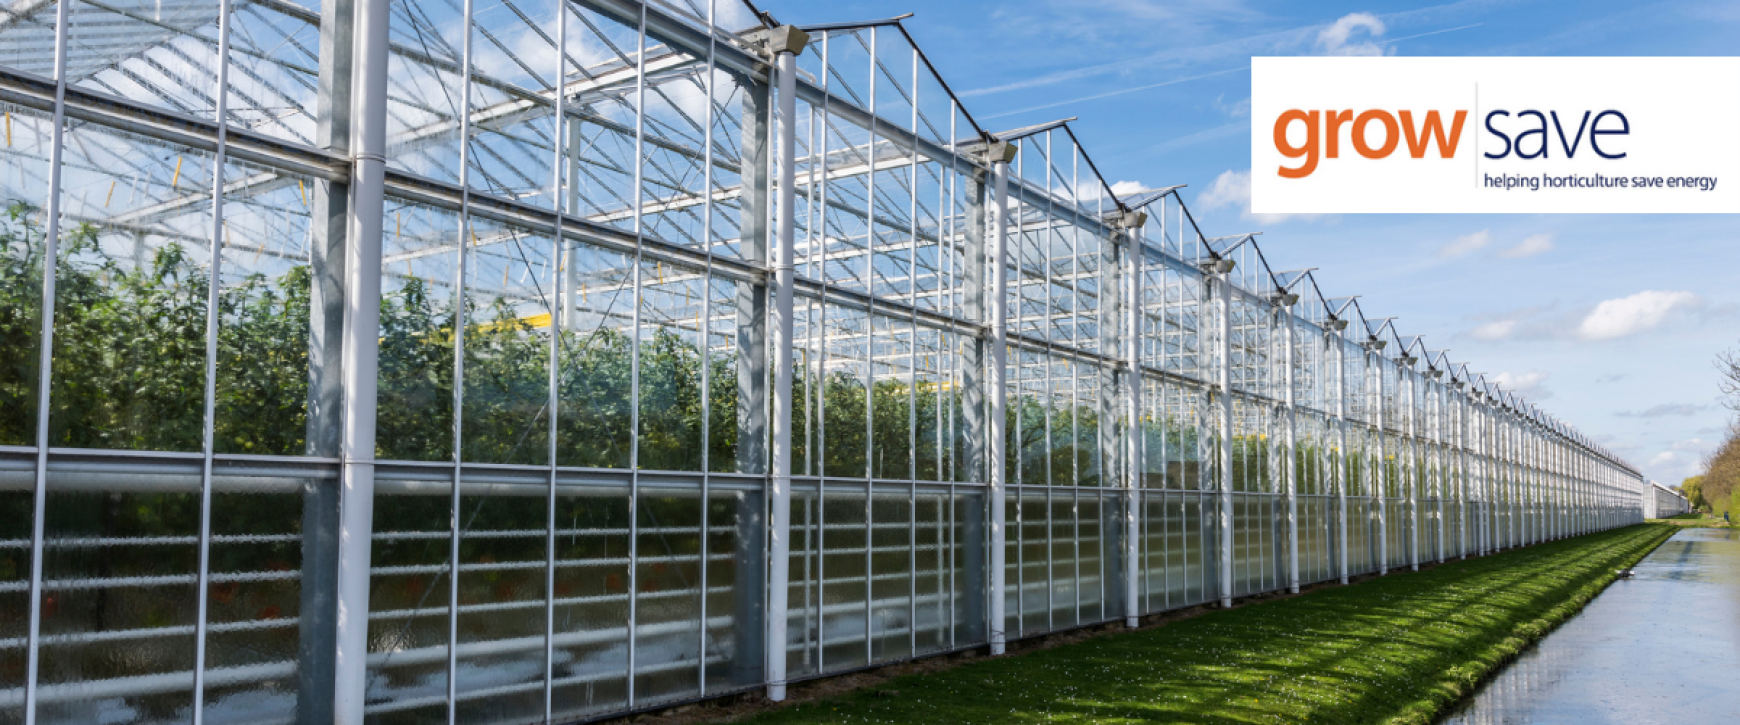 Exploring Innovation and Efficiency in Greenhouse Crop Growing: Join the GrowSave Study Tour to the Netherlands